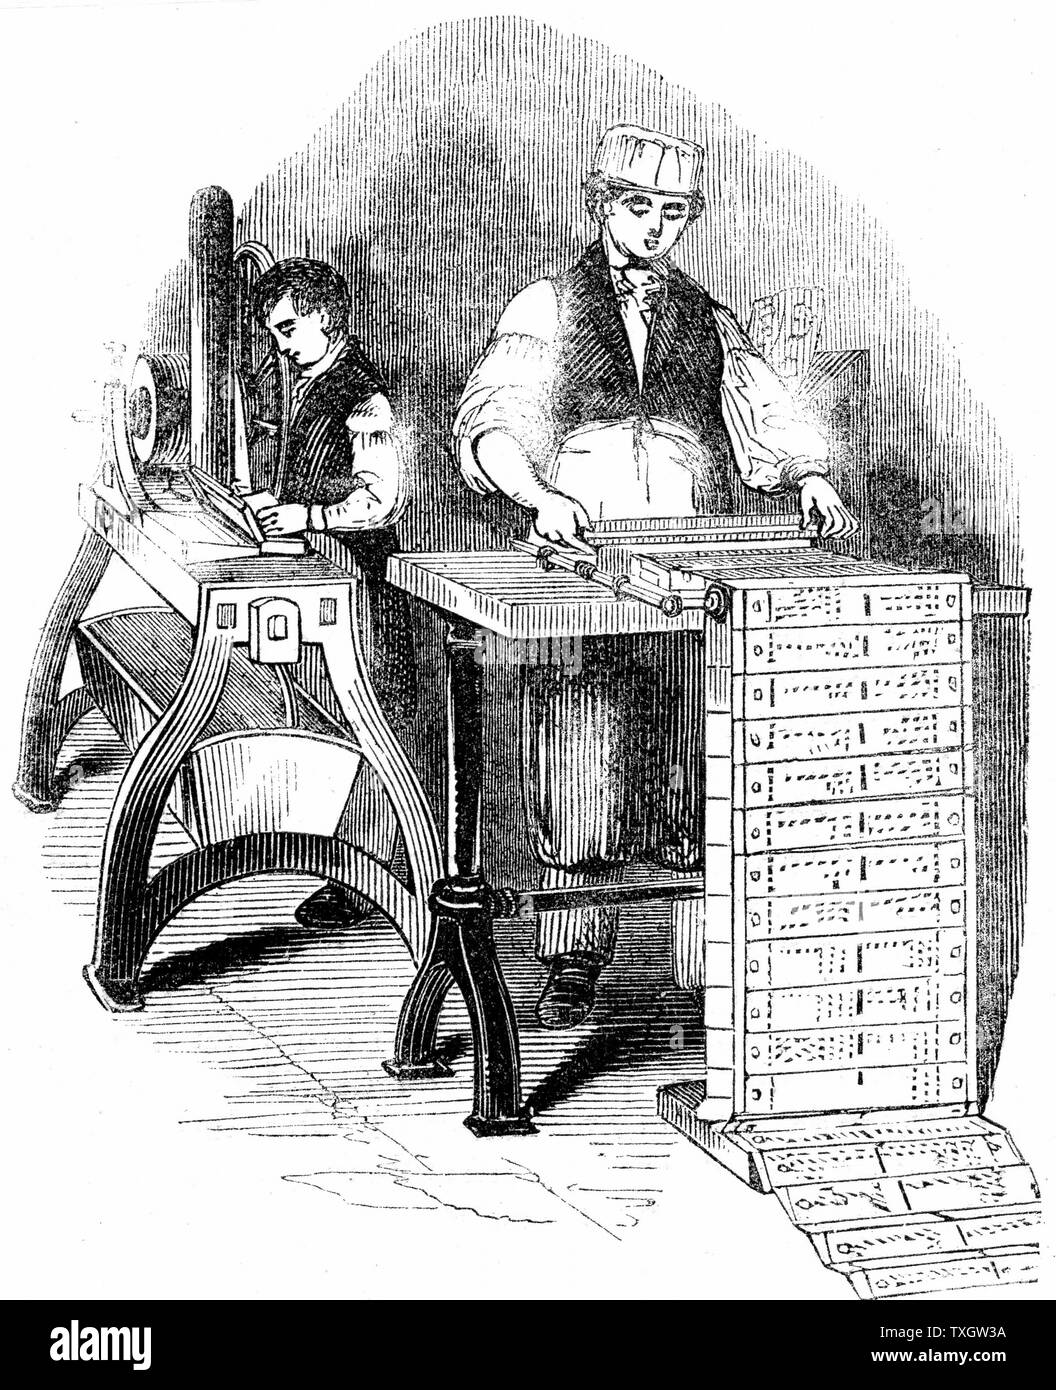 Preparing punched cards for a Jacquard loom. Card for each weft thread of pattern. 400-800 normal, but sometimes 24,000 were worked From George Dodd 'The Textile Manufactures of Great Britain' 1844 Engraving  London Stock Photo